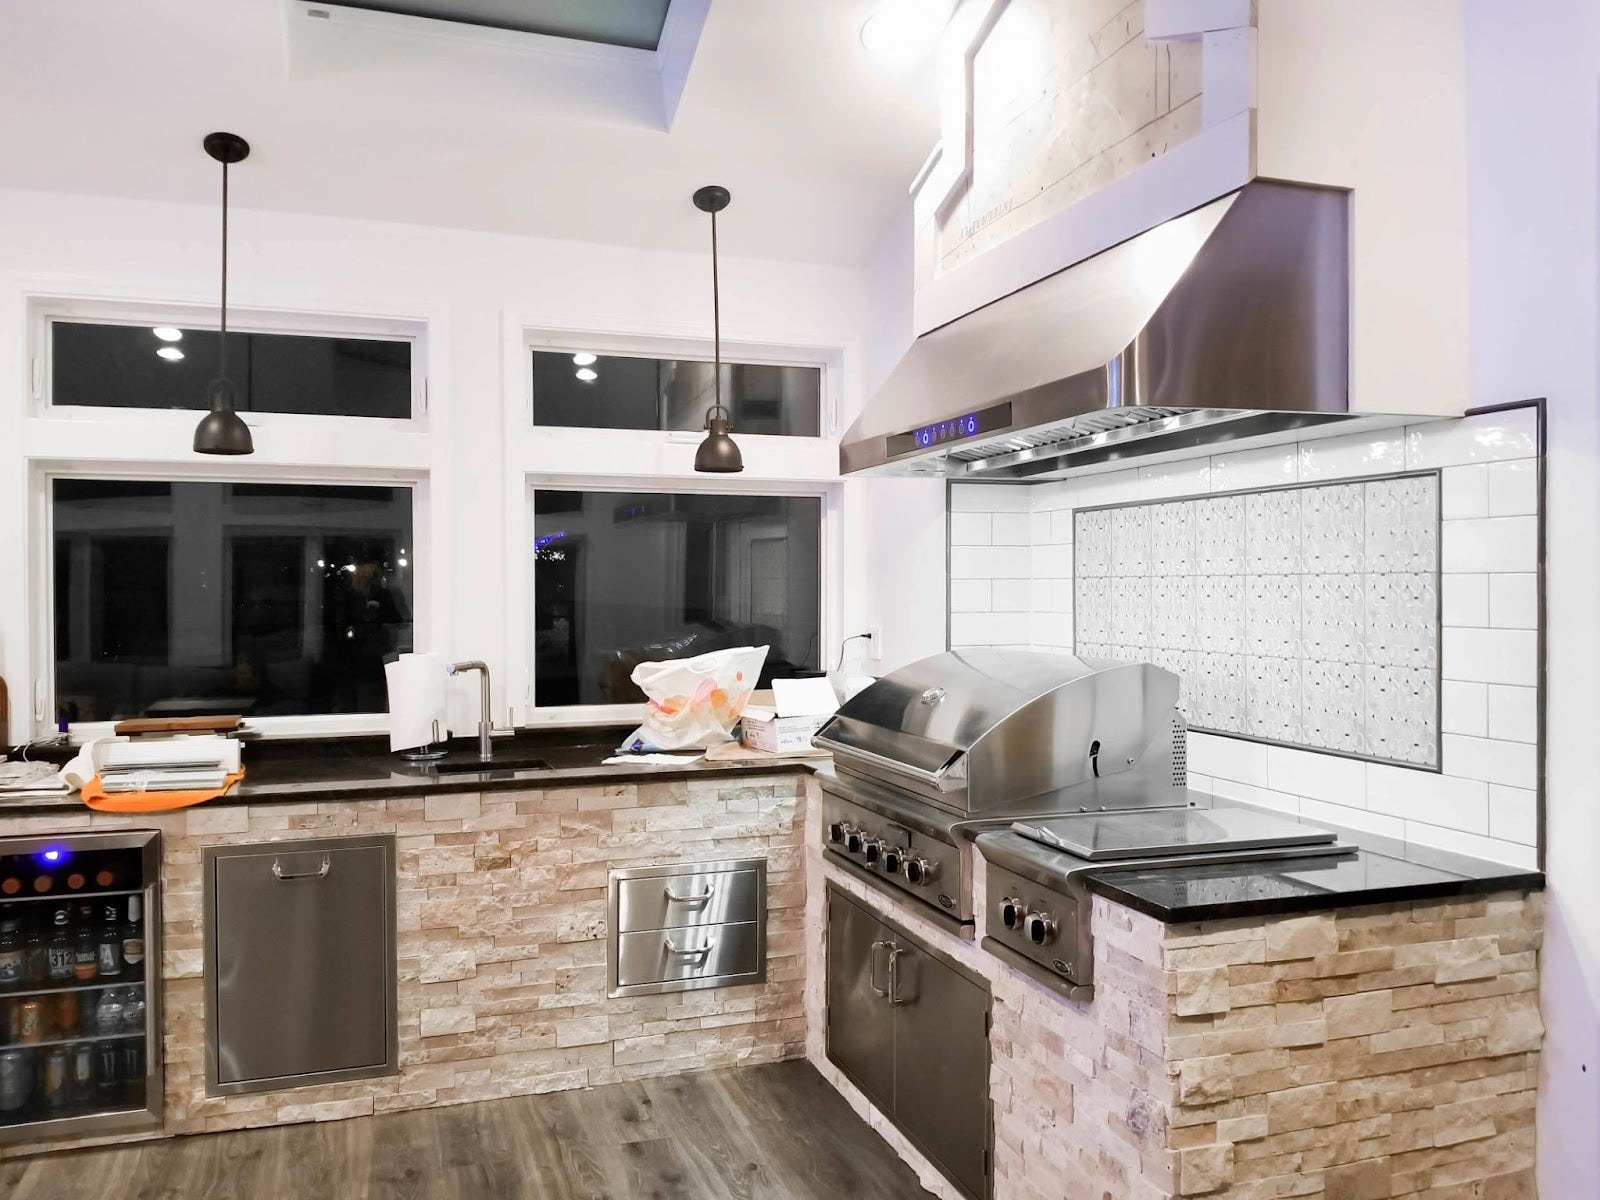 Fun Indoor/Outdoor Kitchen: This inviting kitchen features stone counters, stainless steel appliances, and a spacious grill. The Proline range hood keeps the air clear. A wine fridge and subway tile backsplash add stylish touches. Perfect for family gatherings! - Proline Range Hoods - prolinerangehoods.com 